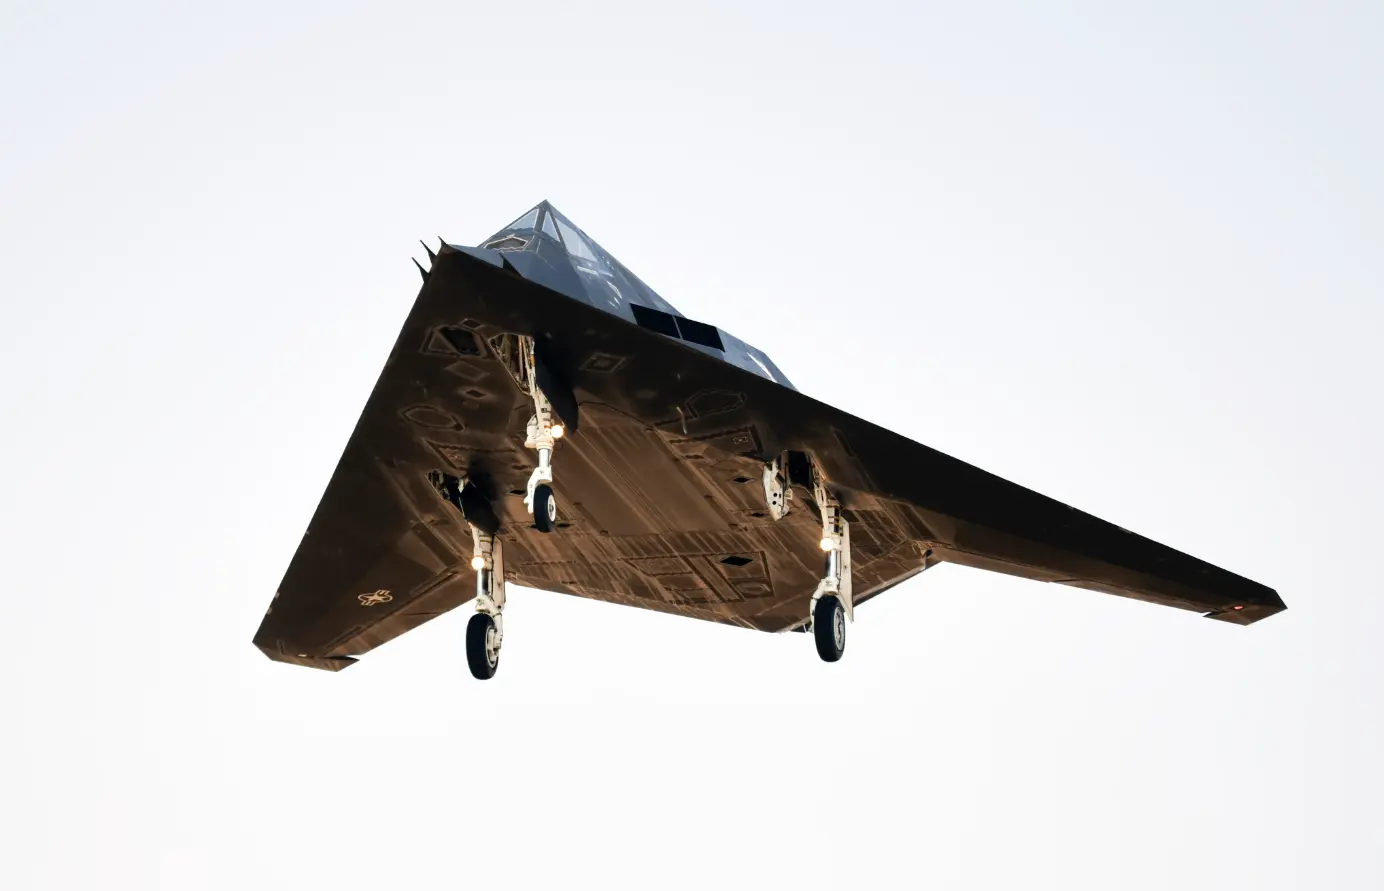 The F-117 was a pioneer in stealth technology